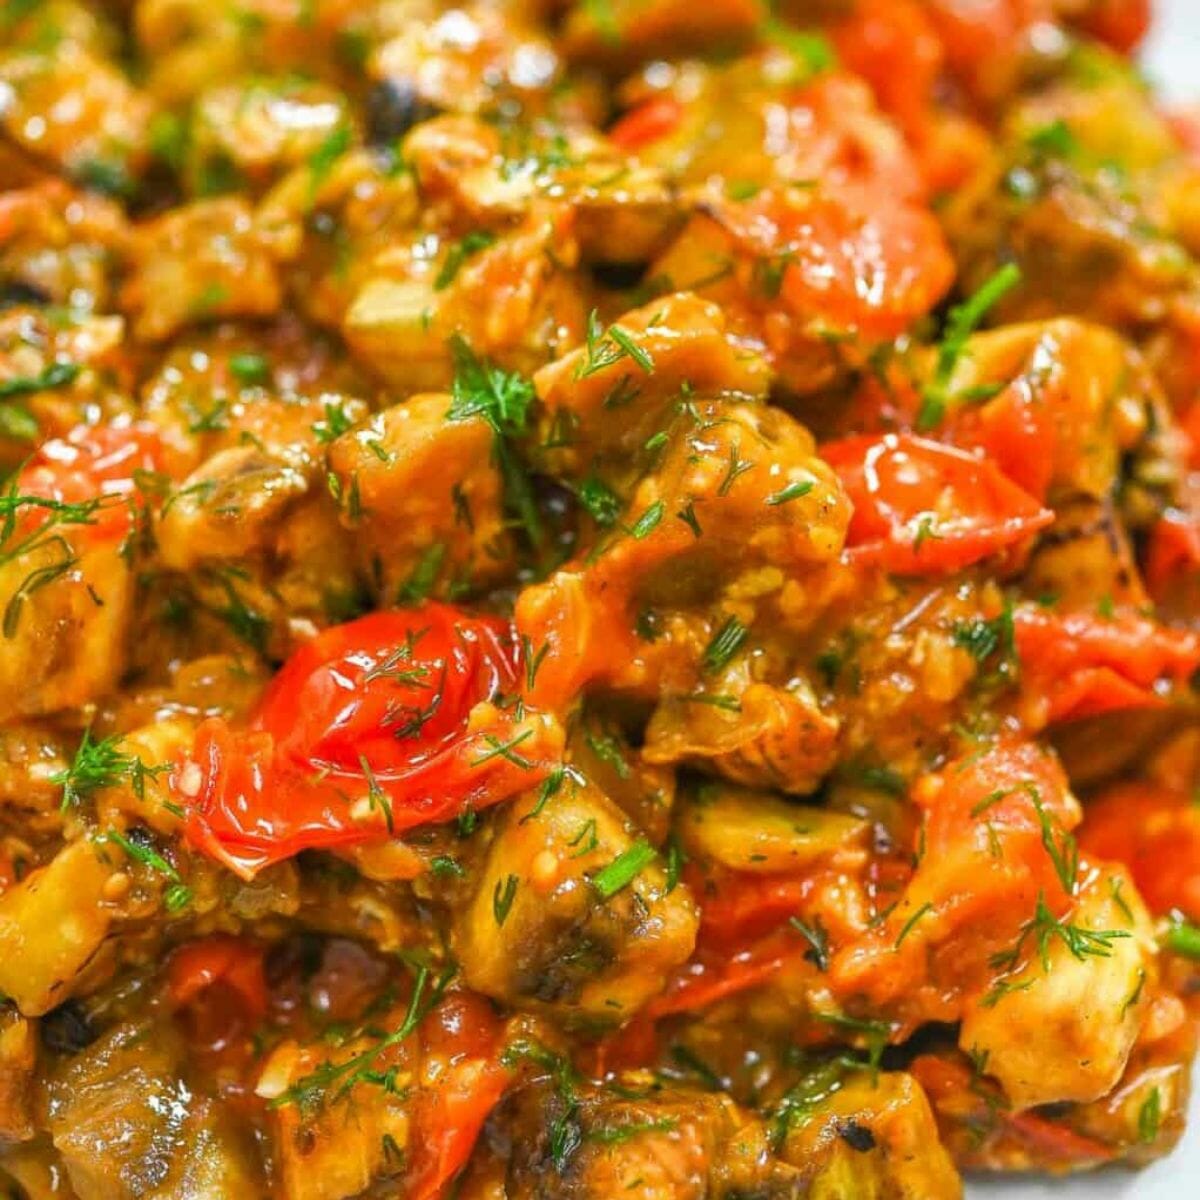 a plate of stir-fried eggplant in tomato sauce and topped with chopped dill